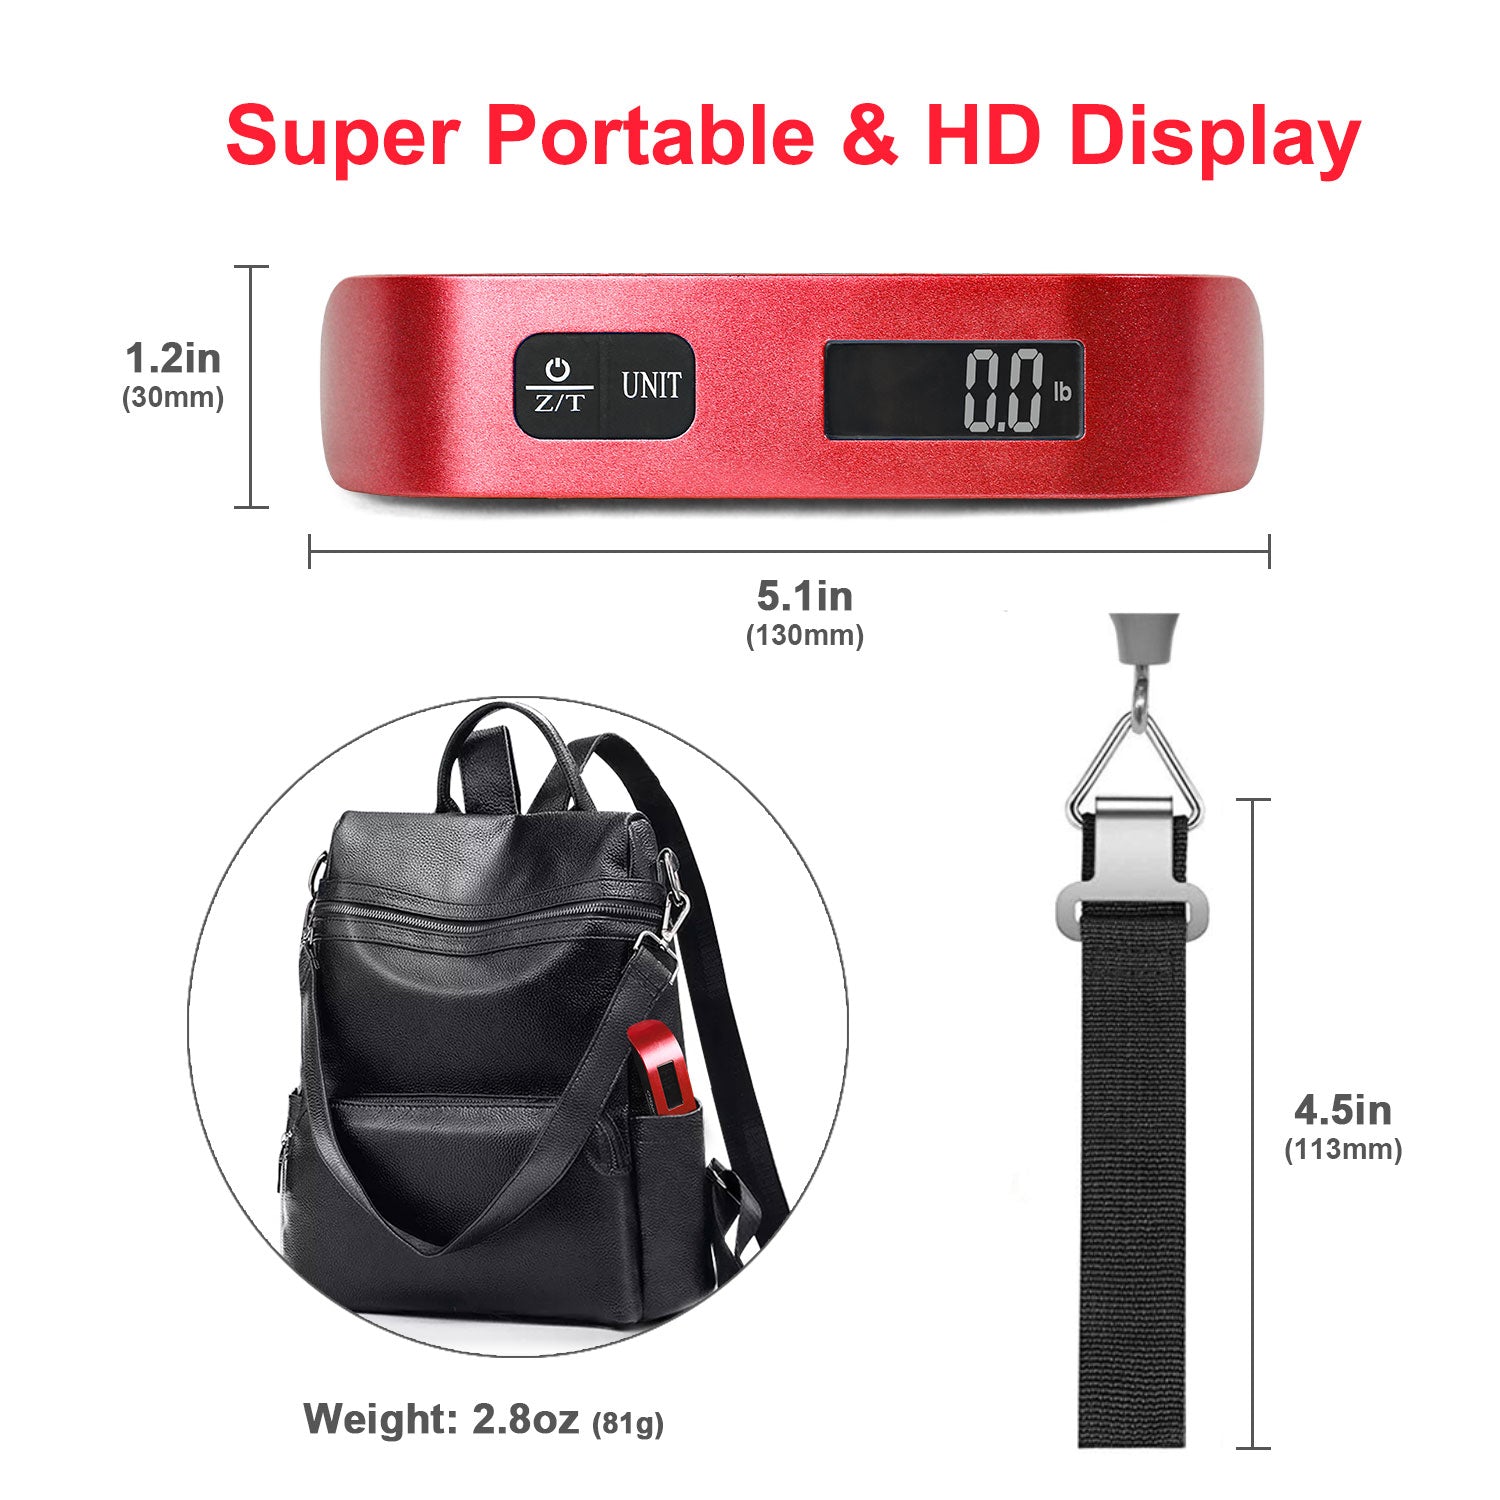 Digital Portable Luggage Scale - Sustainable Travel & Living